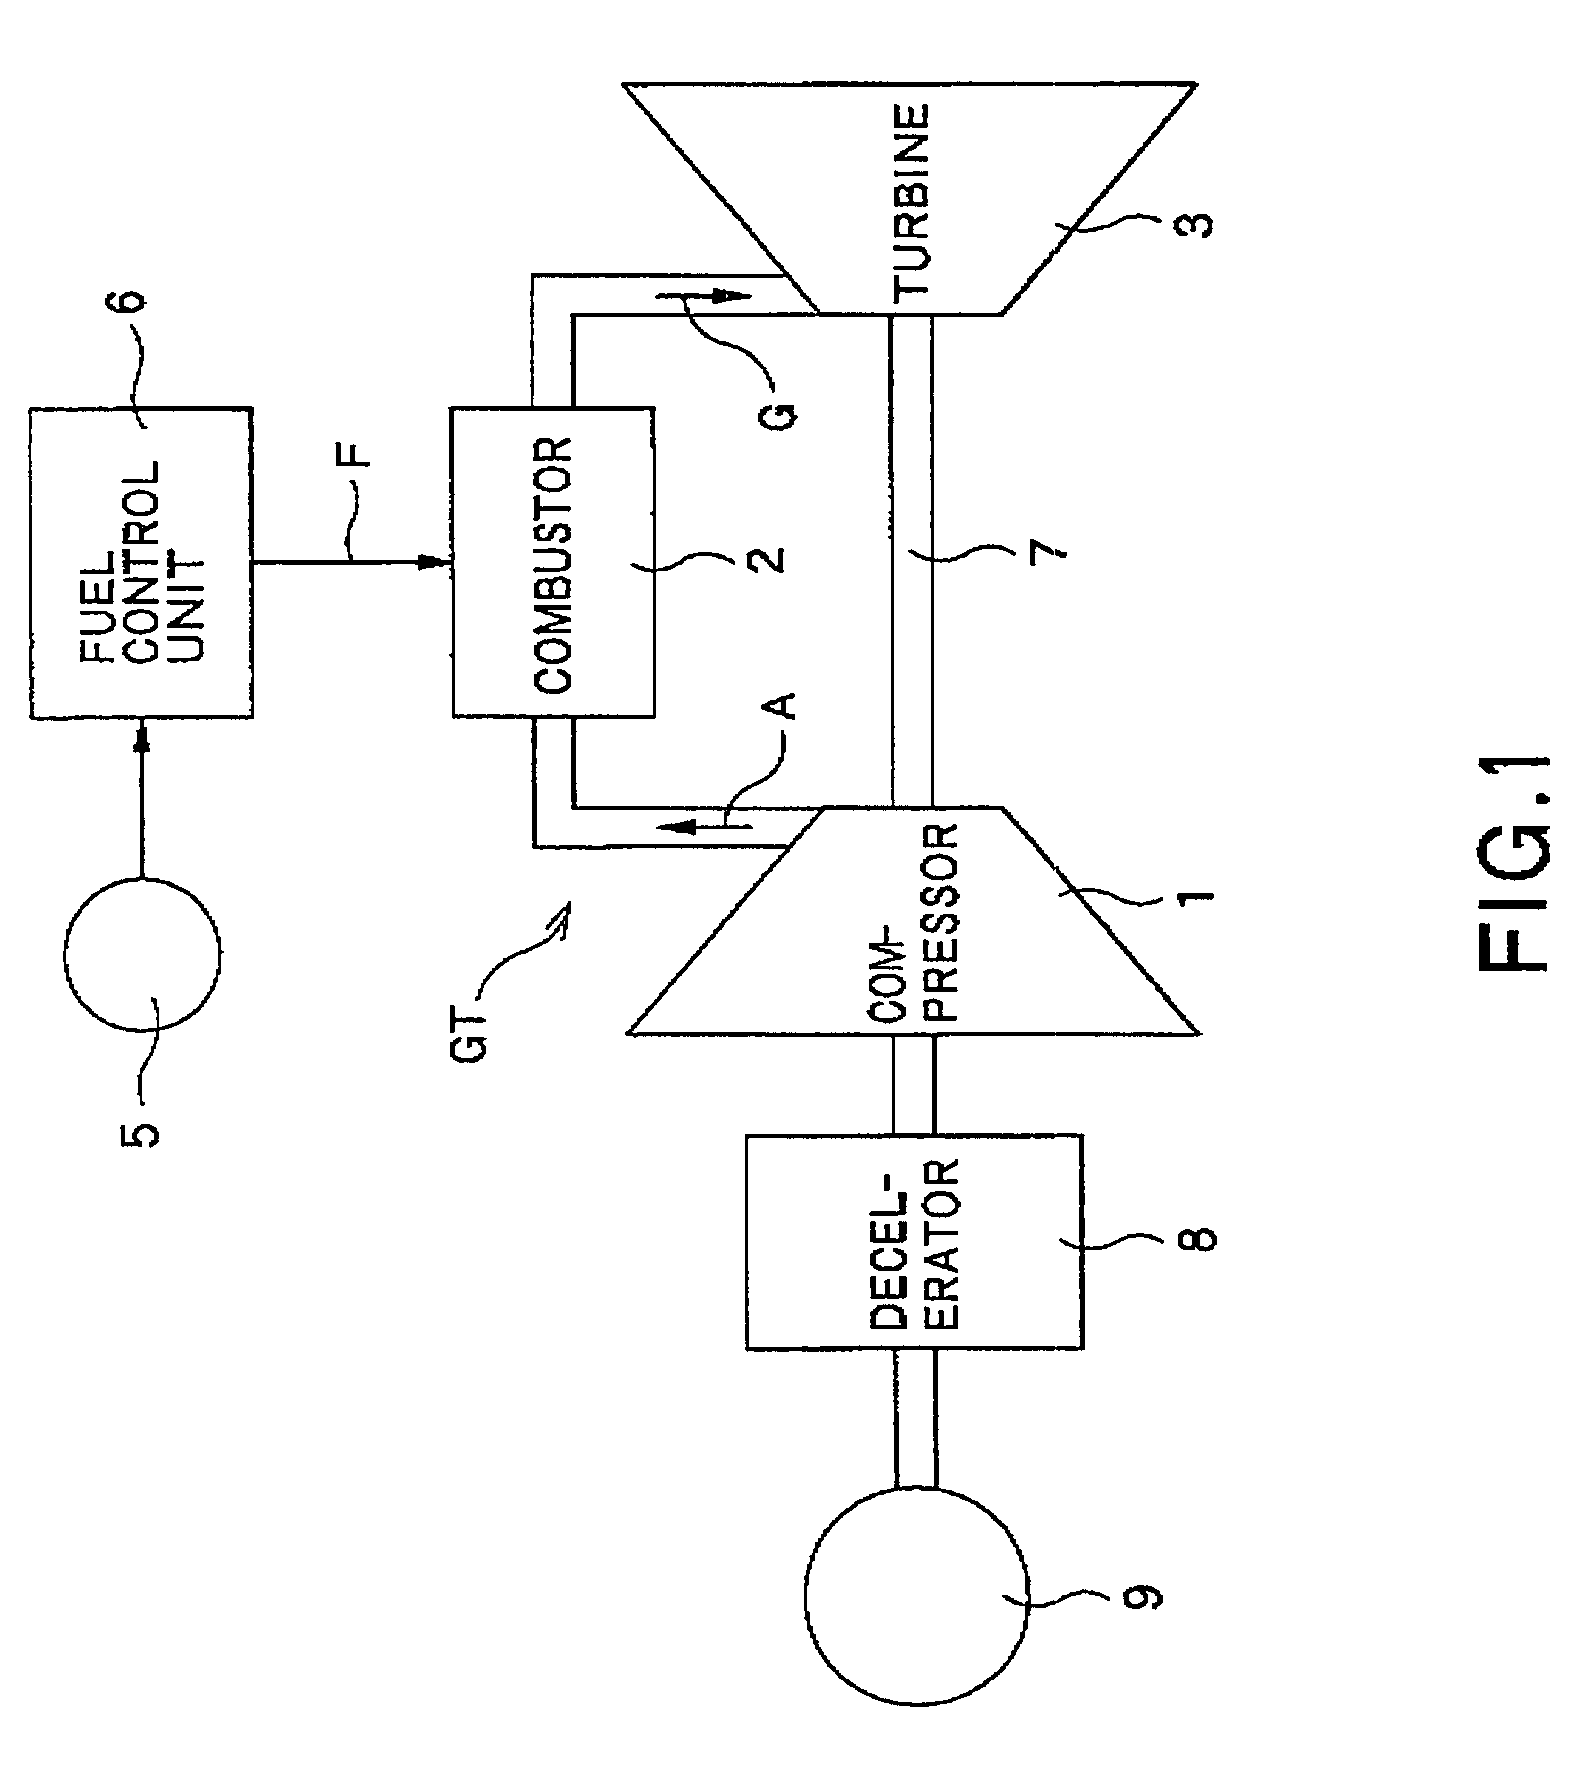 Gas turbine combustor including separate fuel injectors for plural zones